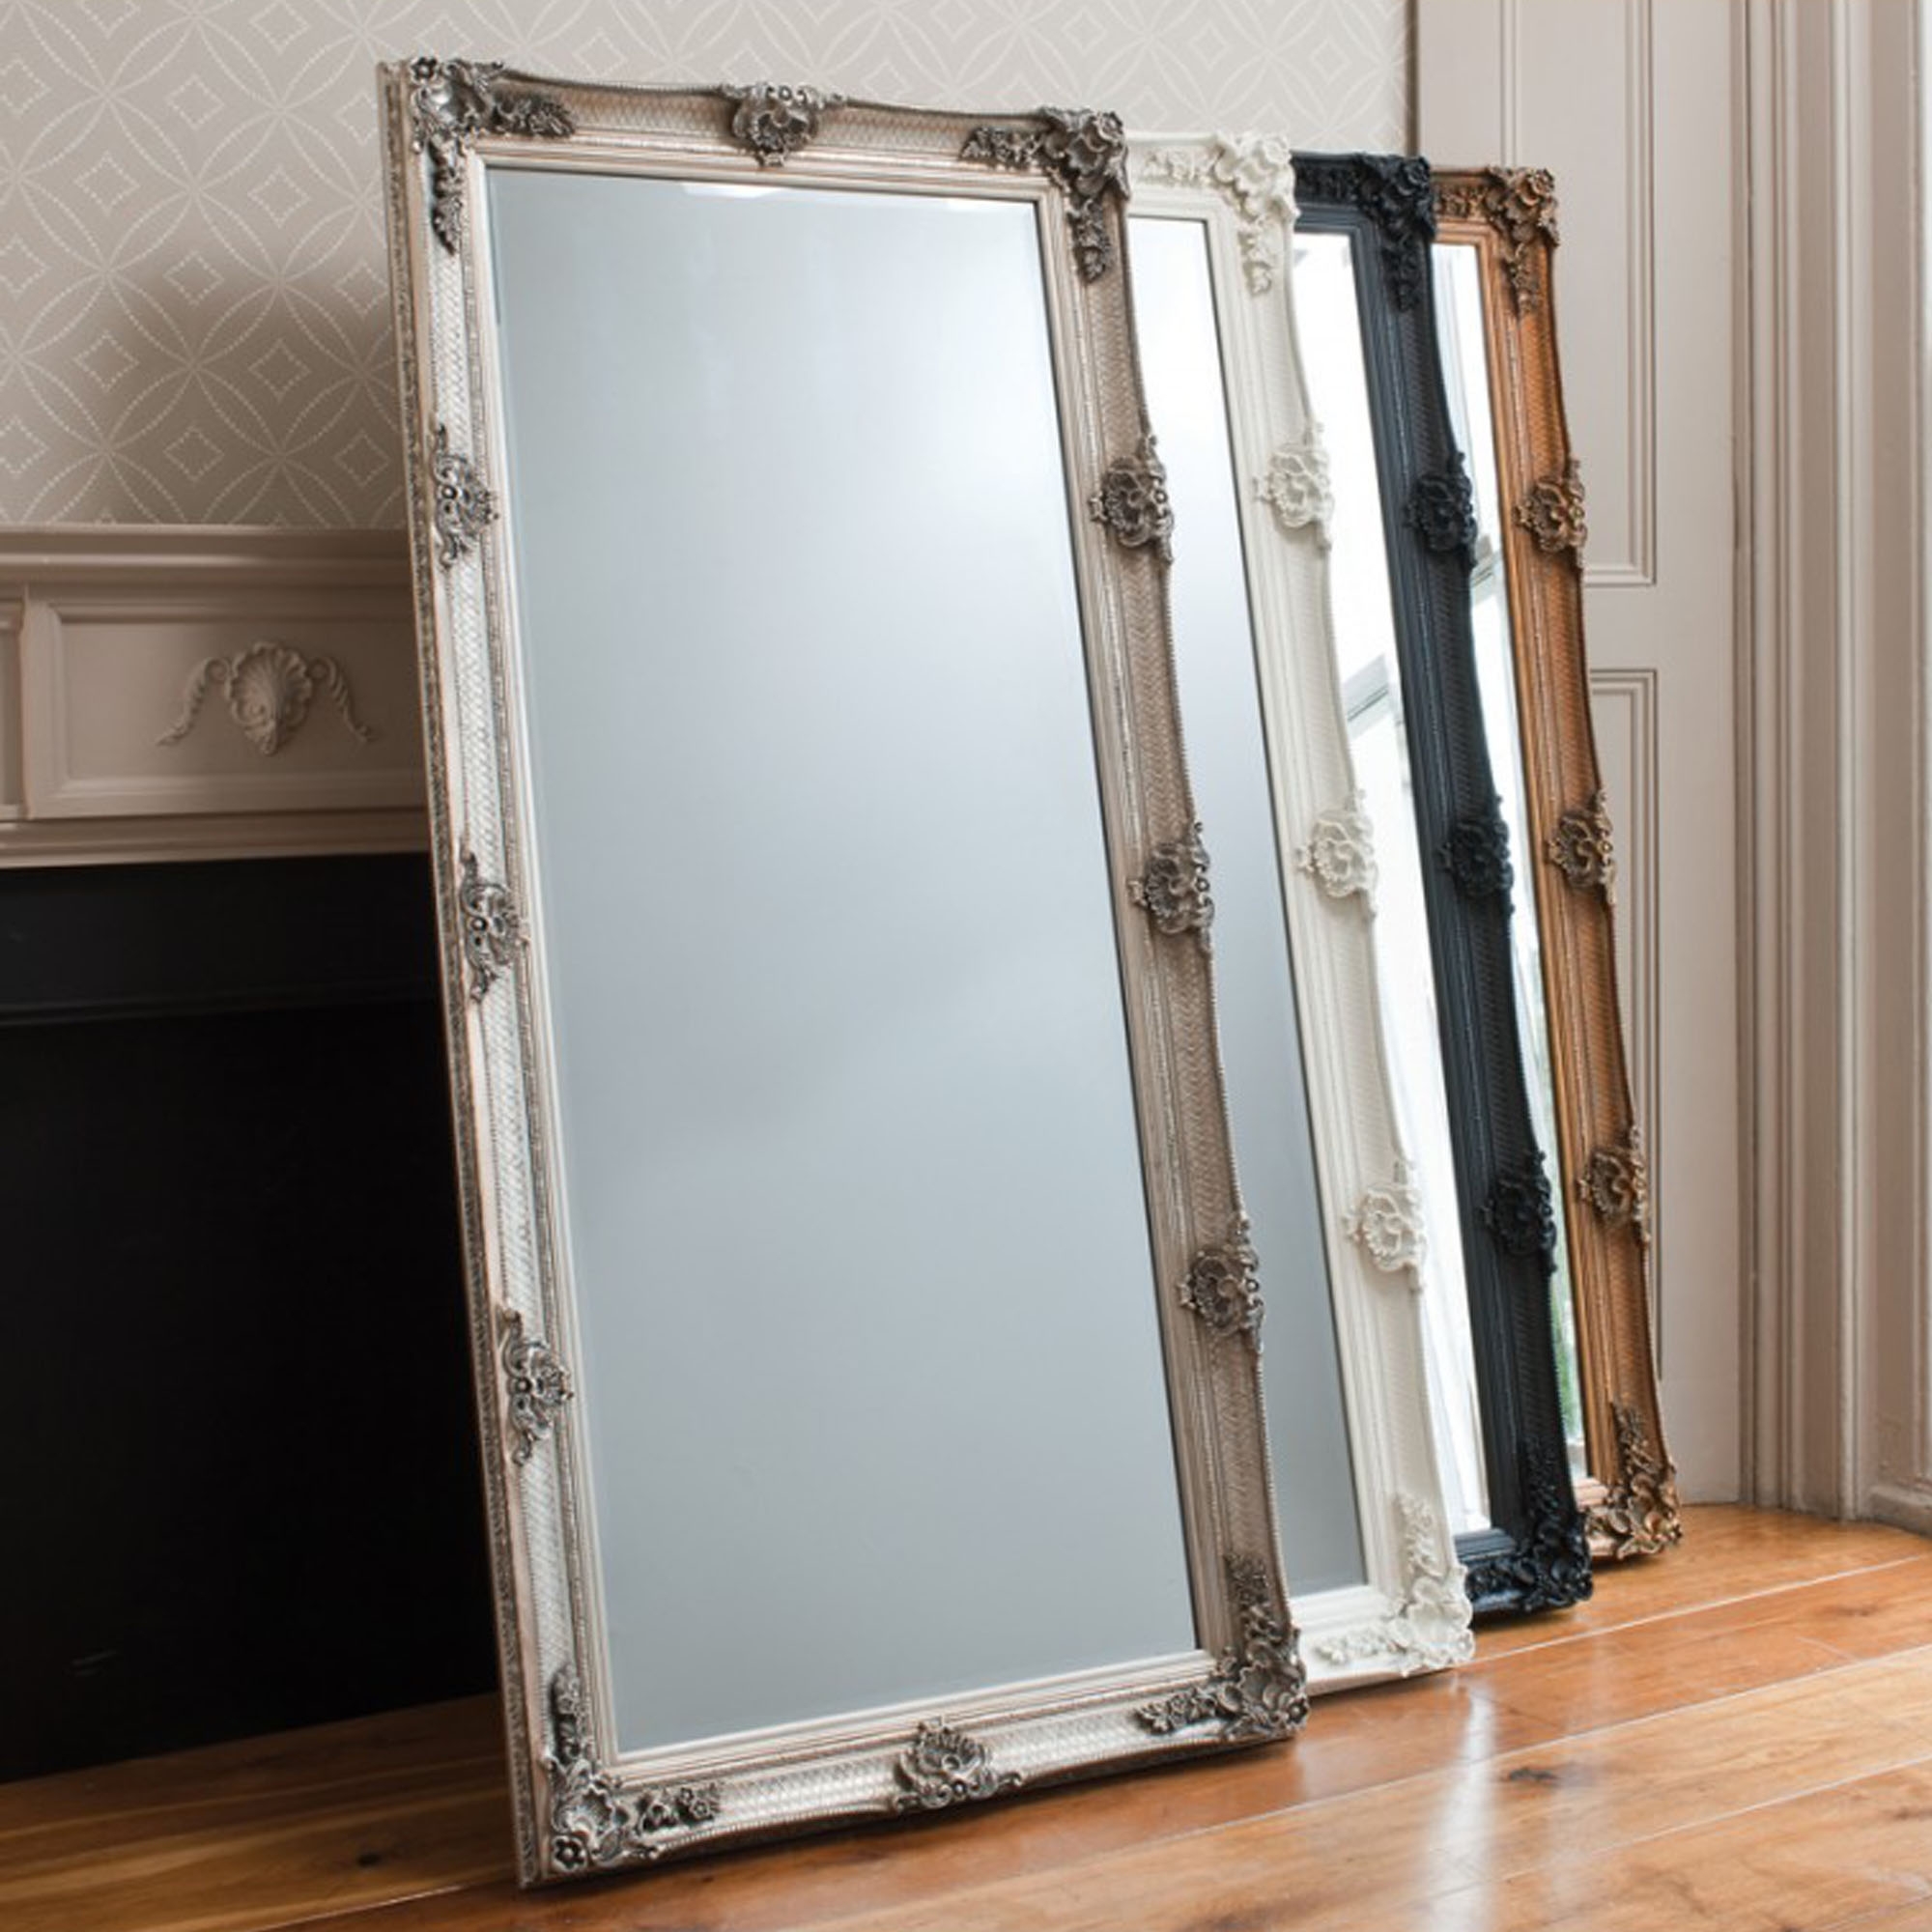 Large Silver Floor Mirror: A Reflection Of Refined Elegance